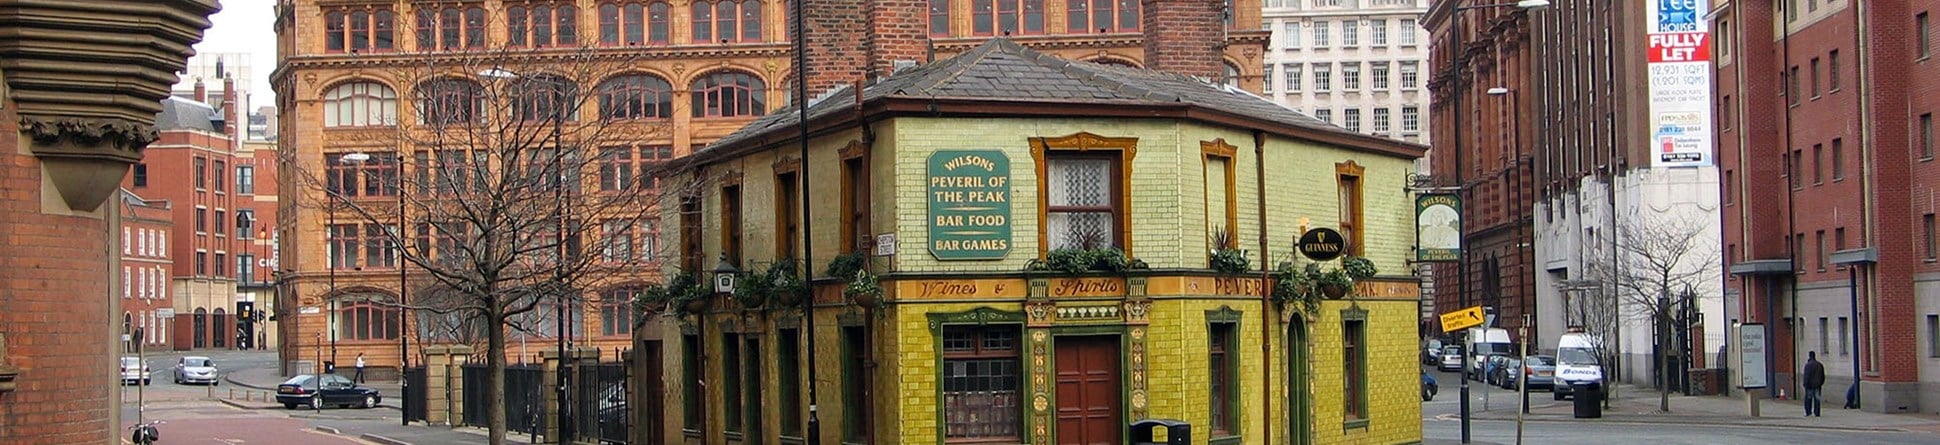 Exterior photo of the green tiled front of the Peveril of the Peak pub.